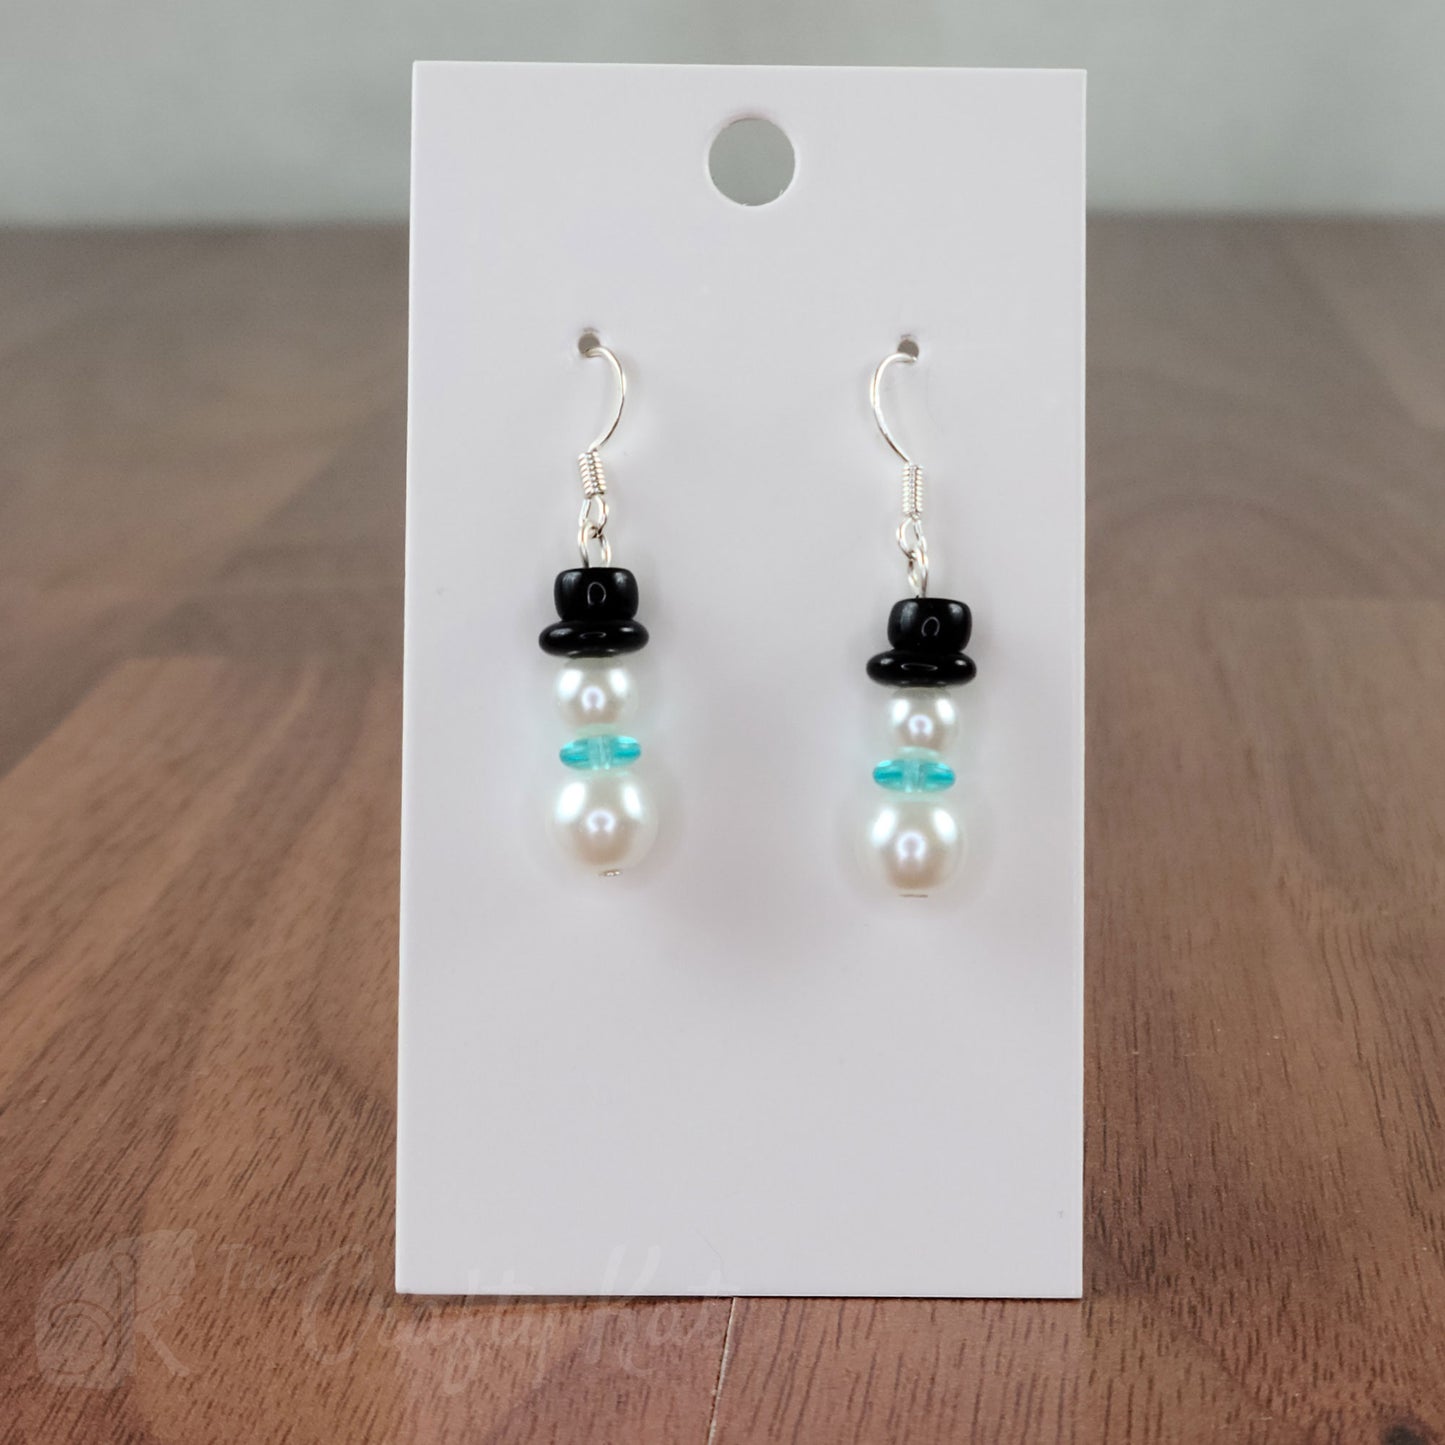 A pair of earring drops made of glass pearls and pressed glass beads, each drop forming the shape of a snowman with an aqua (sky blue) scarf and black top hat.